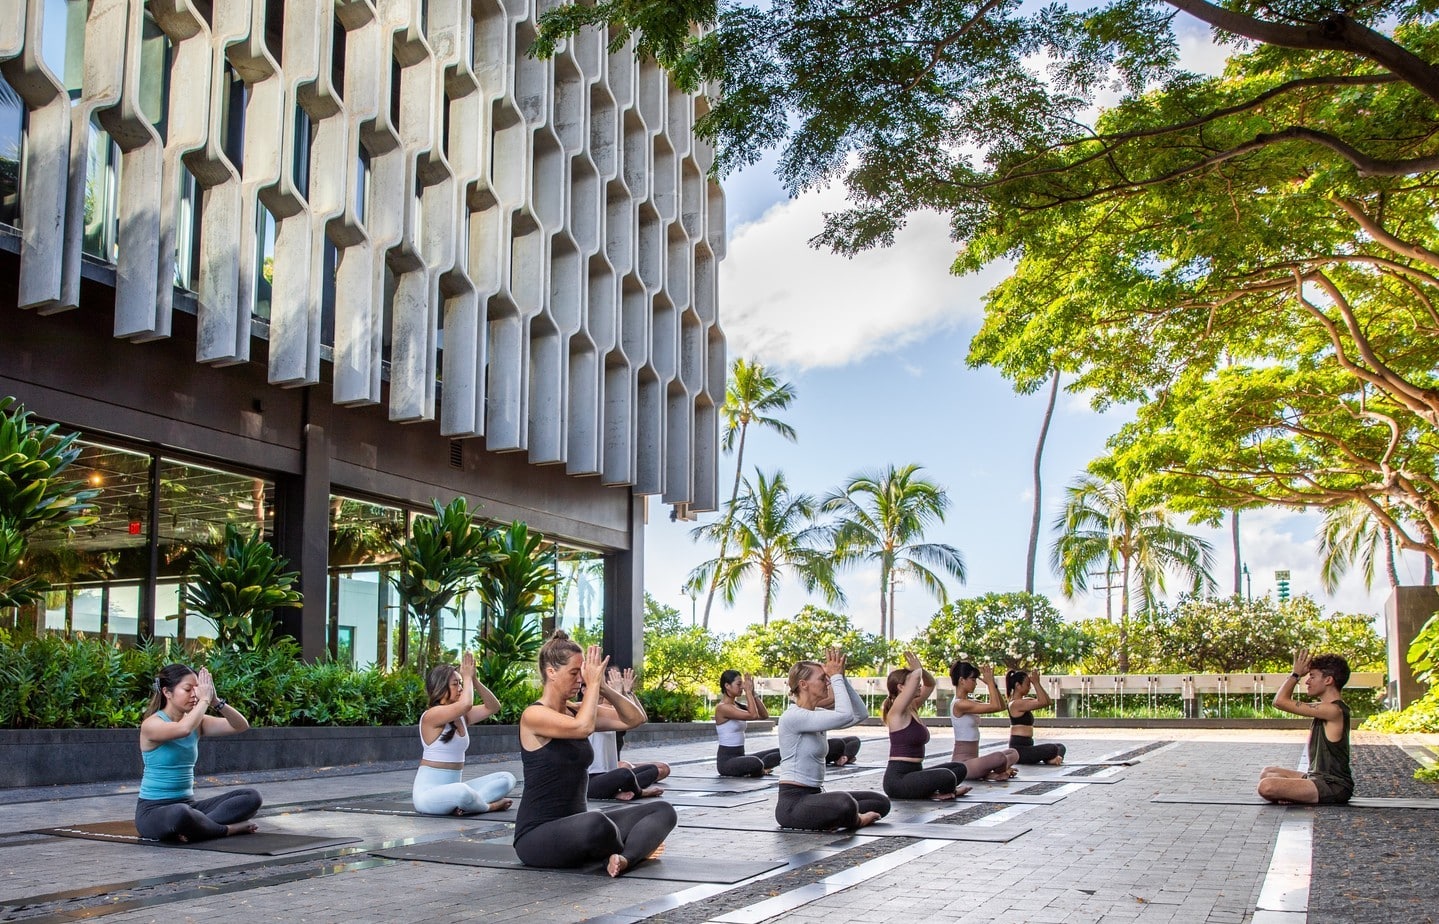 Join @corepoweryoga at the IBM Courtyard on Wednesdays from 5pm - 6pm for complimentary yoga classes suitable for all fitness levels. Register now at the link in our bio.